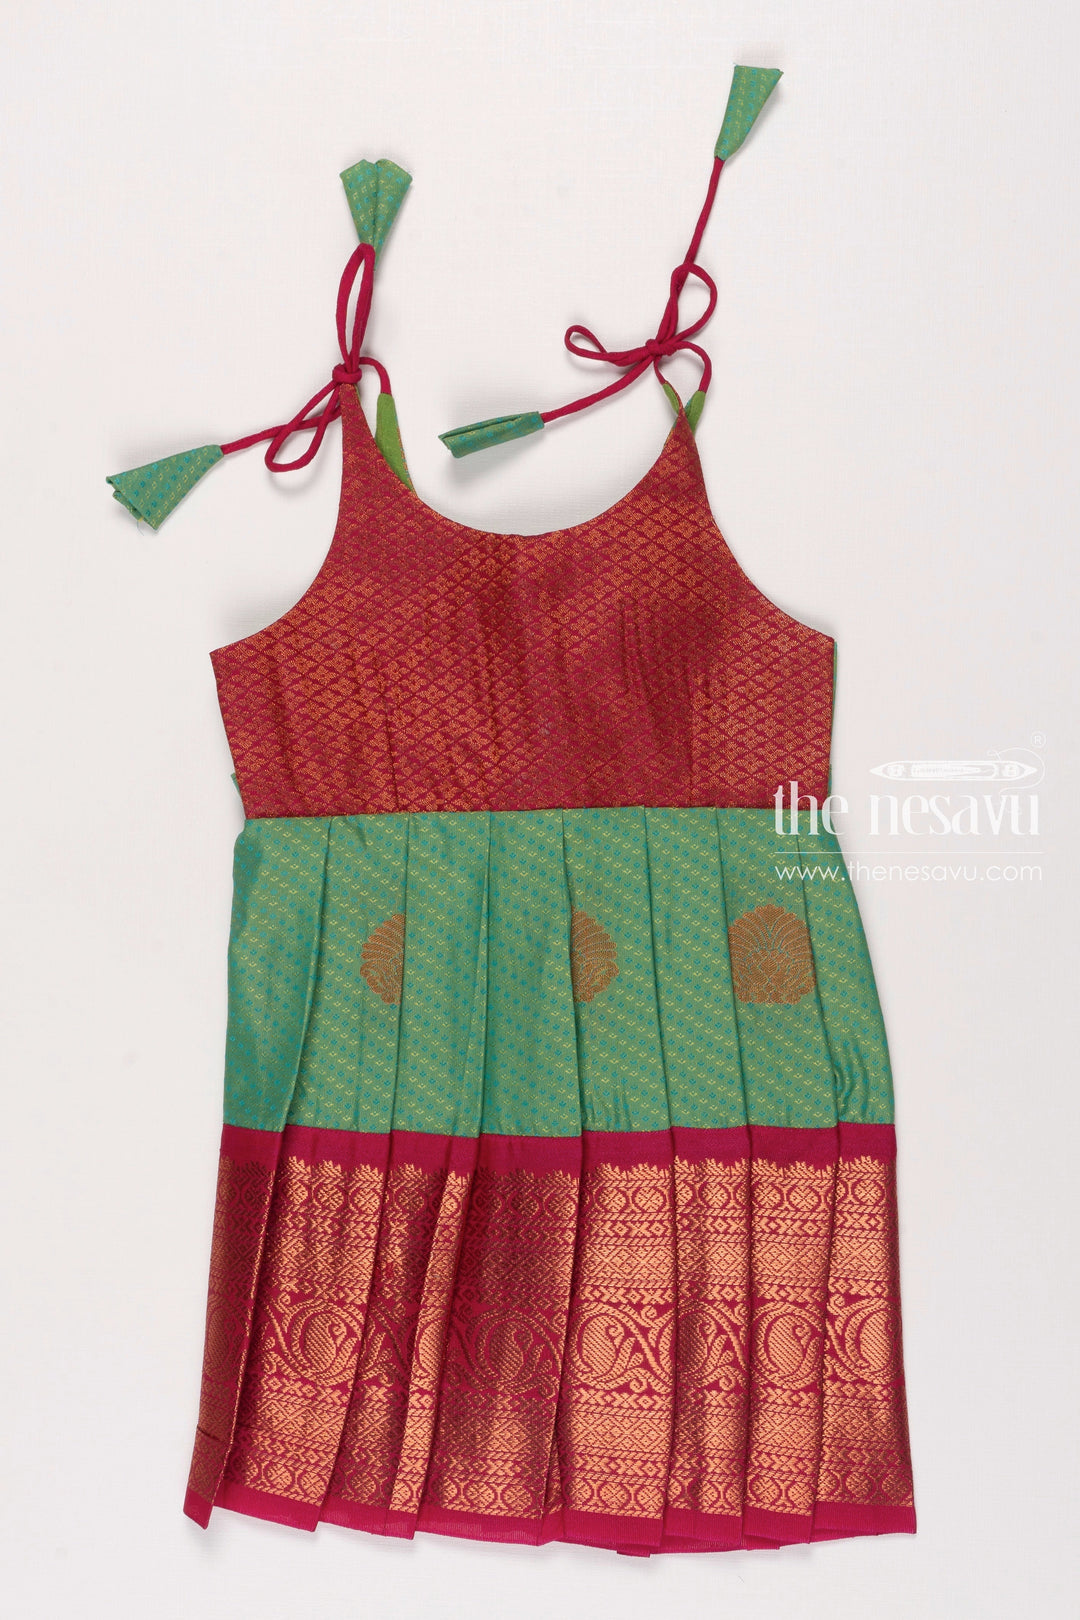 The Nesavu Tie-up Frock Vibrant TieUp Silk Frock for Girls  Contrast Magenta and Green with Traditional Patterns Nesavu 14 (6M) / Green / Style 1 T303A-14 Girls Magenta Green Silk Frock | Festive Tie Up Design | Traditional Chic Attire | The Nesavu